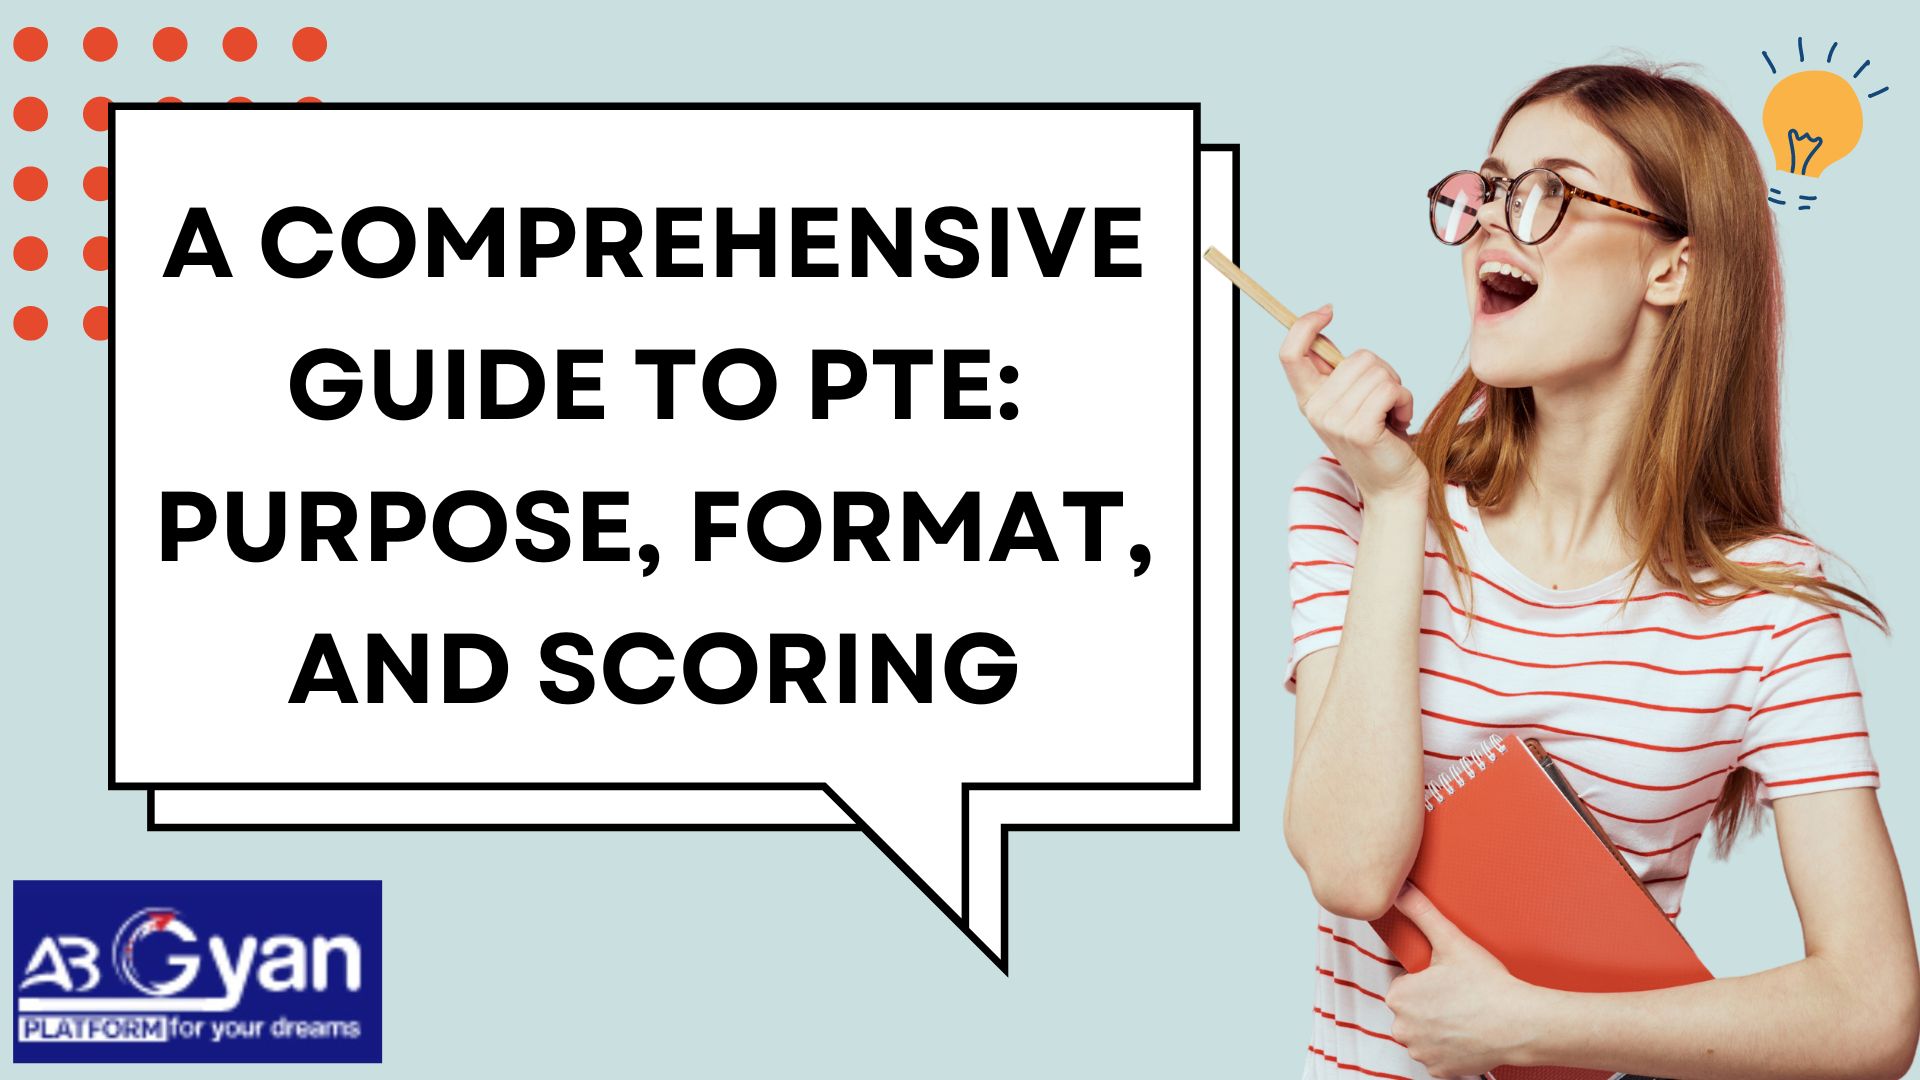 A comprehensive guide to PTE: purpose, format, and scoring